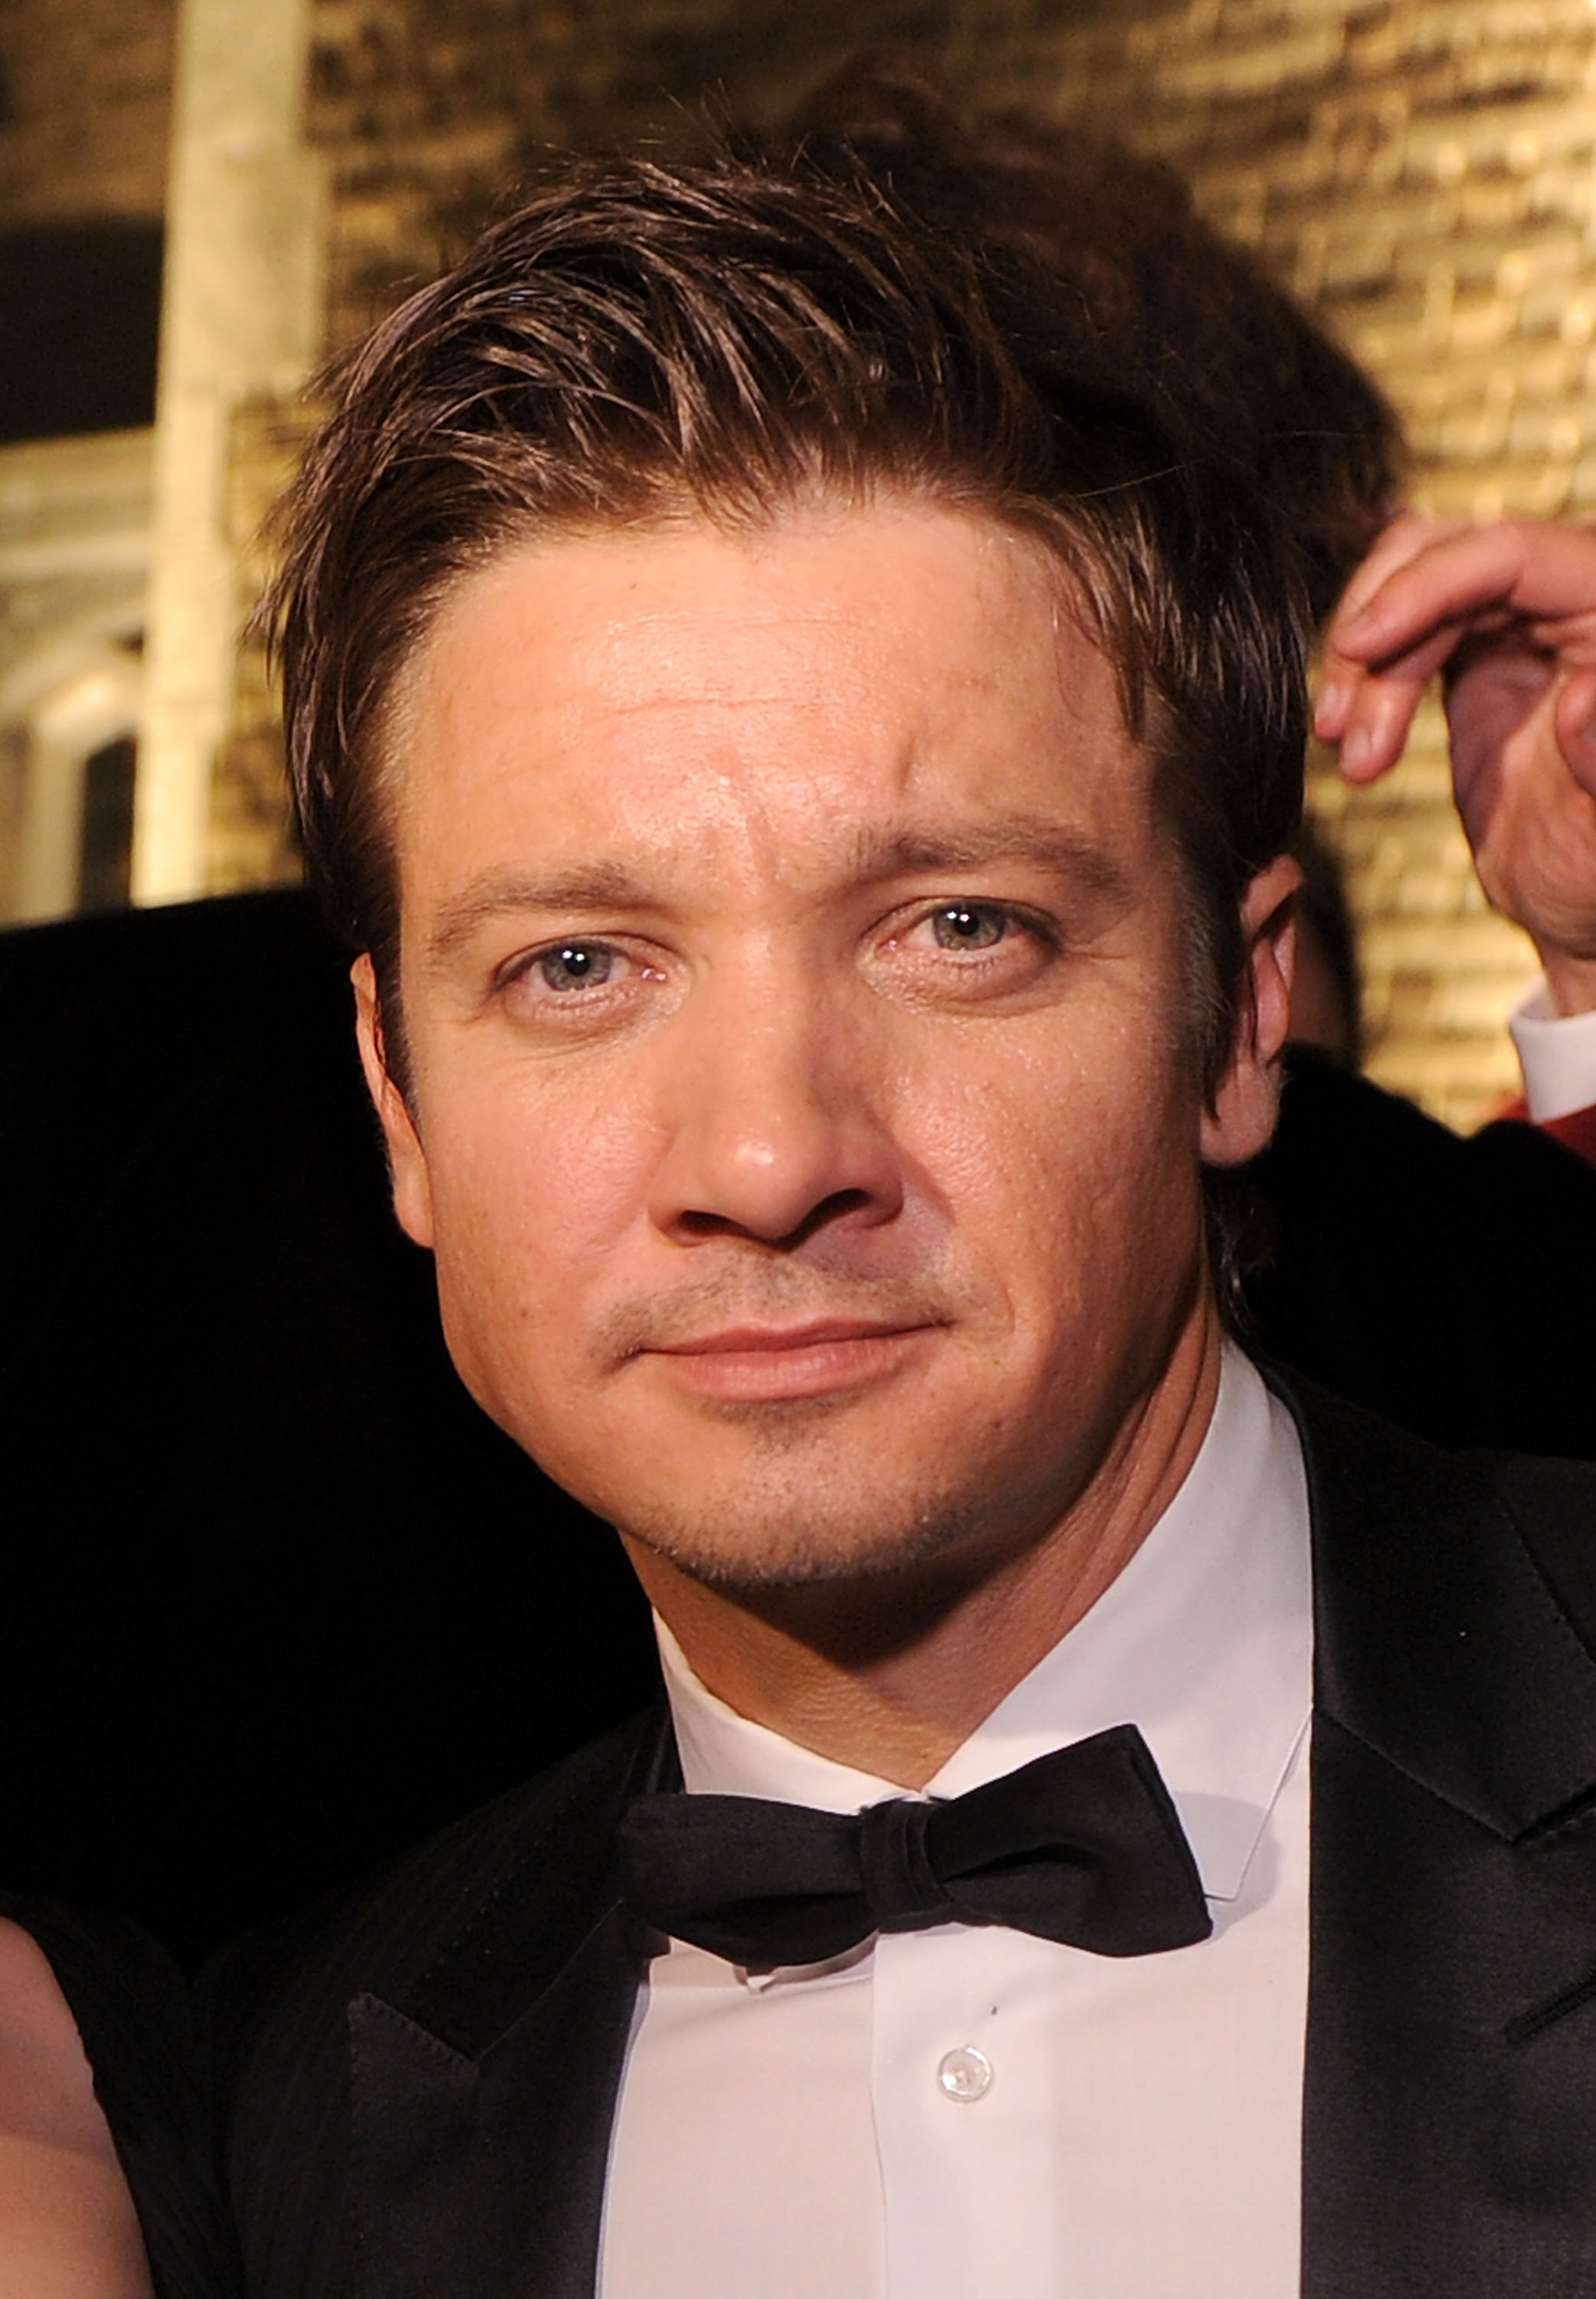 Jeremy Renner attends the Bloomberg/Vanity Fair party on May 1, 2010 in Washington, DC | Source: Getty Images